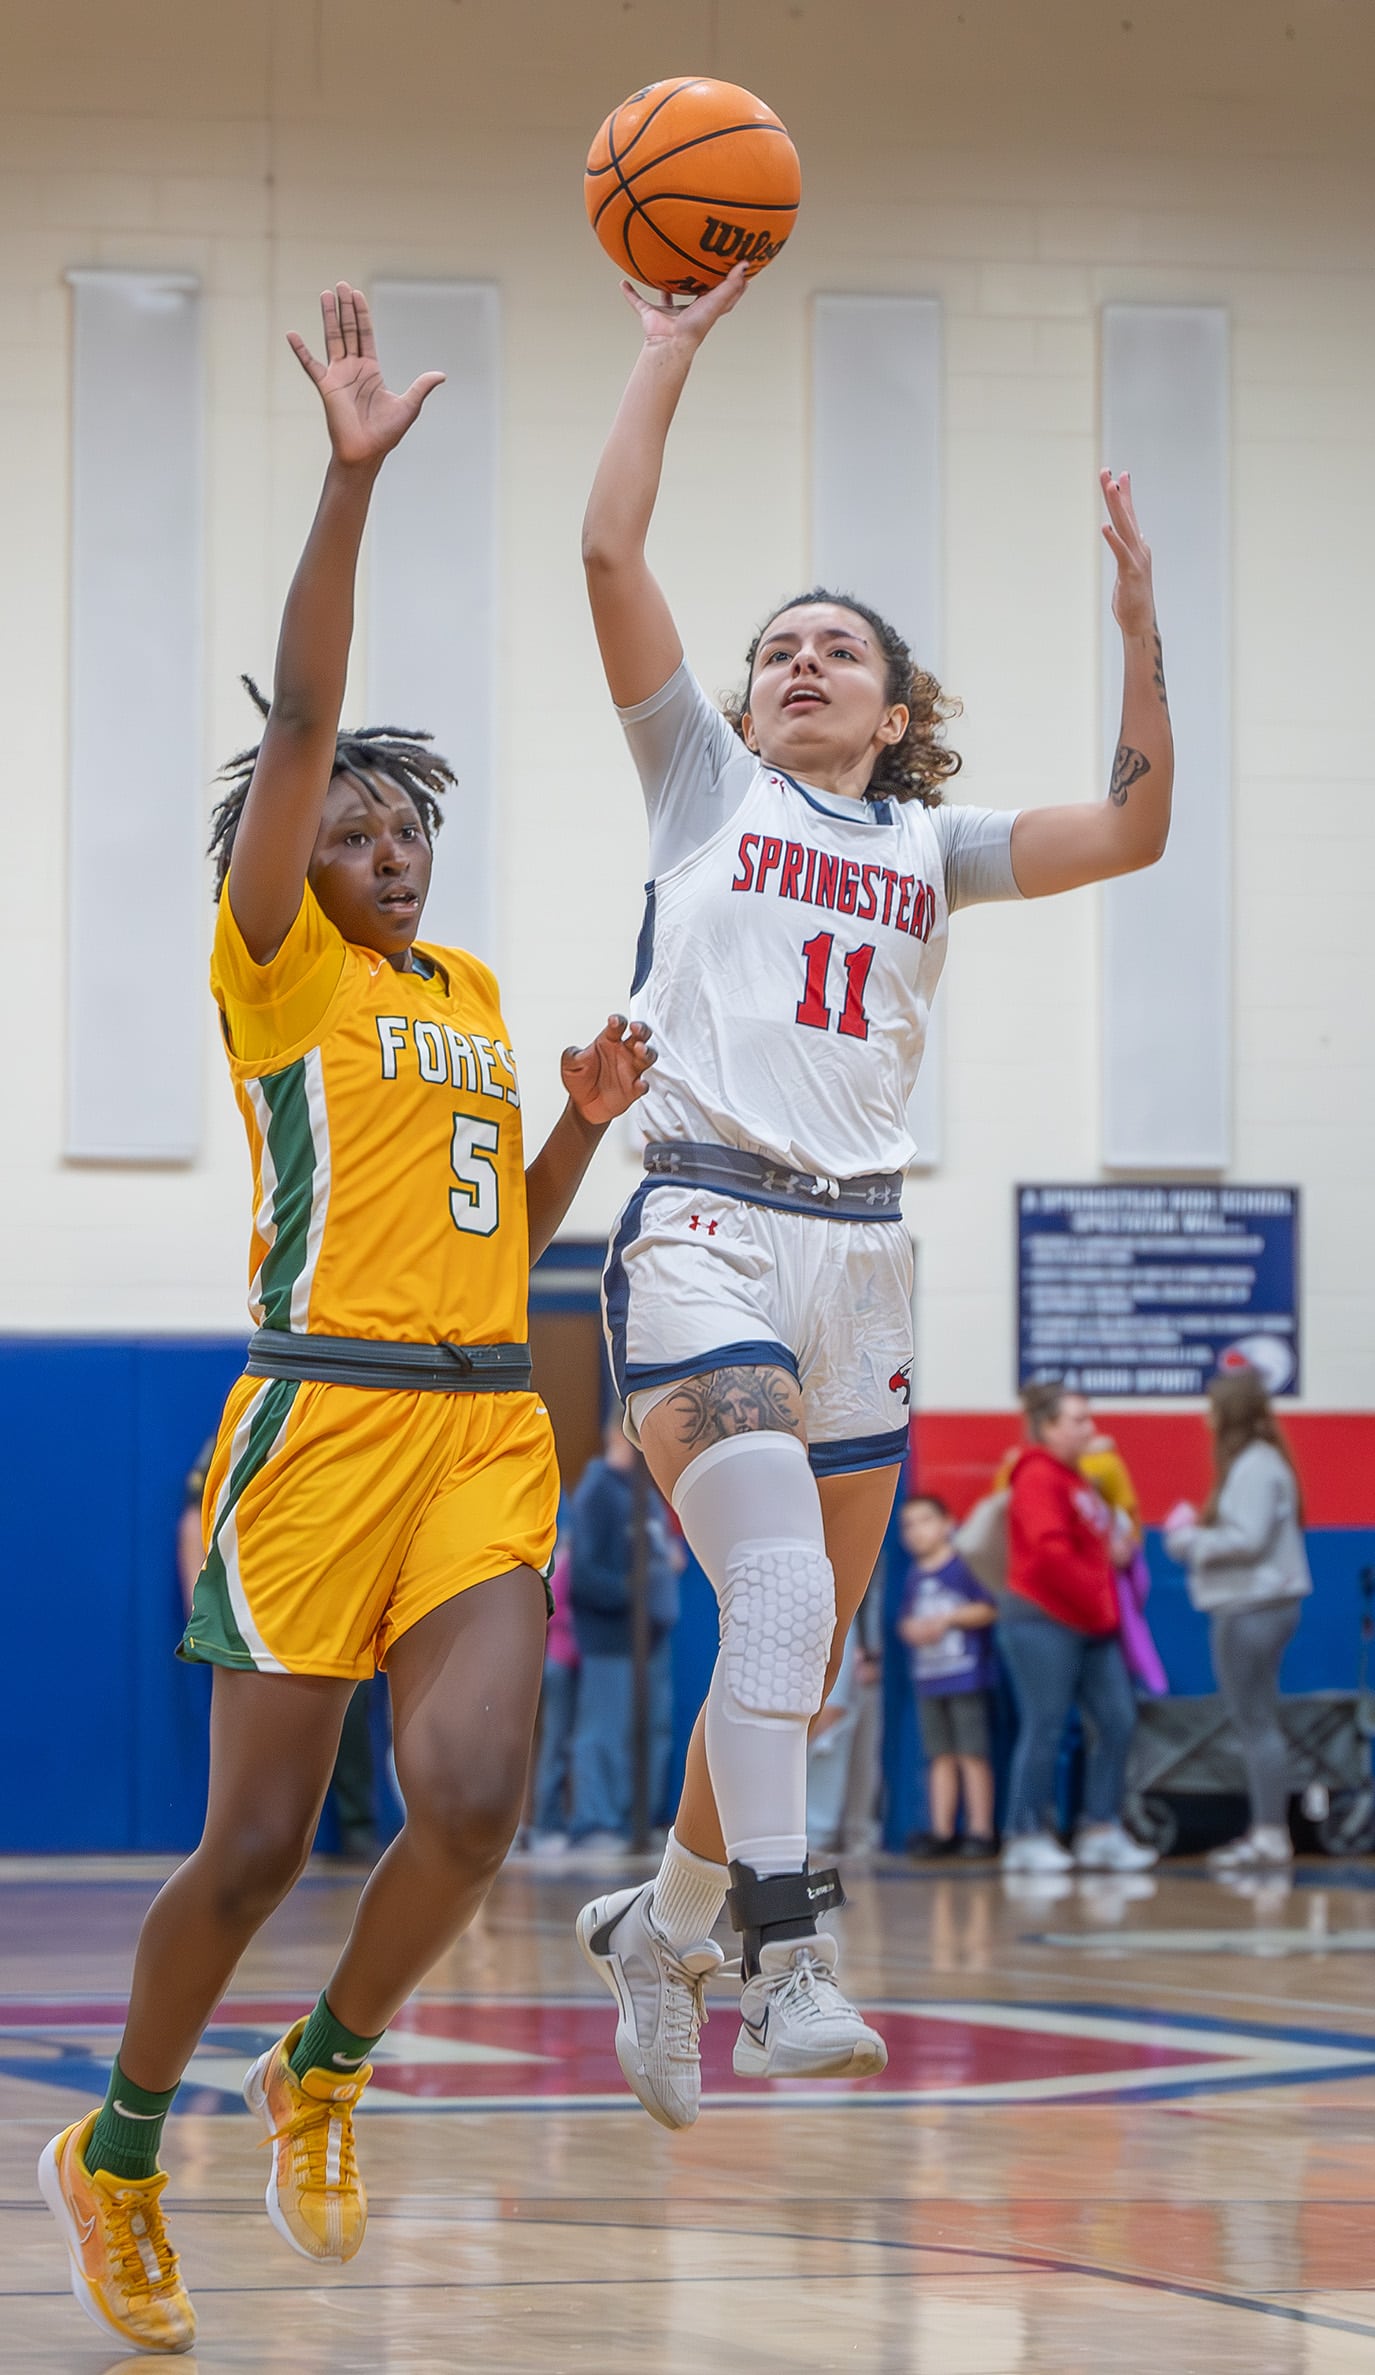 Springstead High School, 11, Samantha Suarez shoots over Forest High defender Janaina Wess, 5, in the 6A Division 4 Championship Game. [Photo by Joe DiCristofalo]